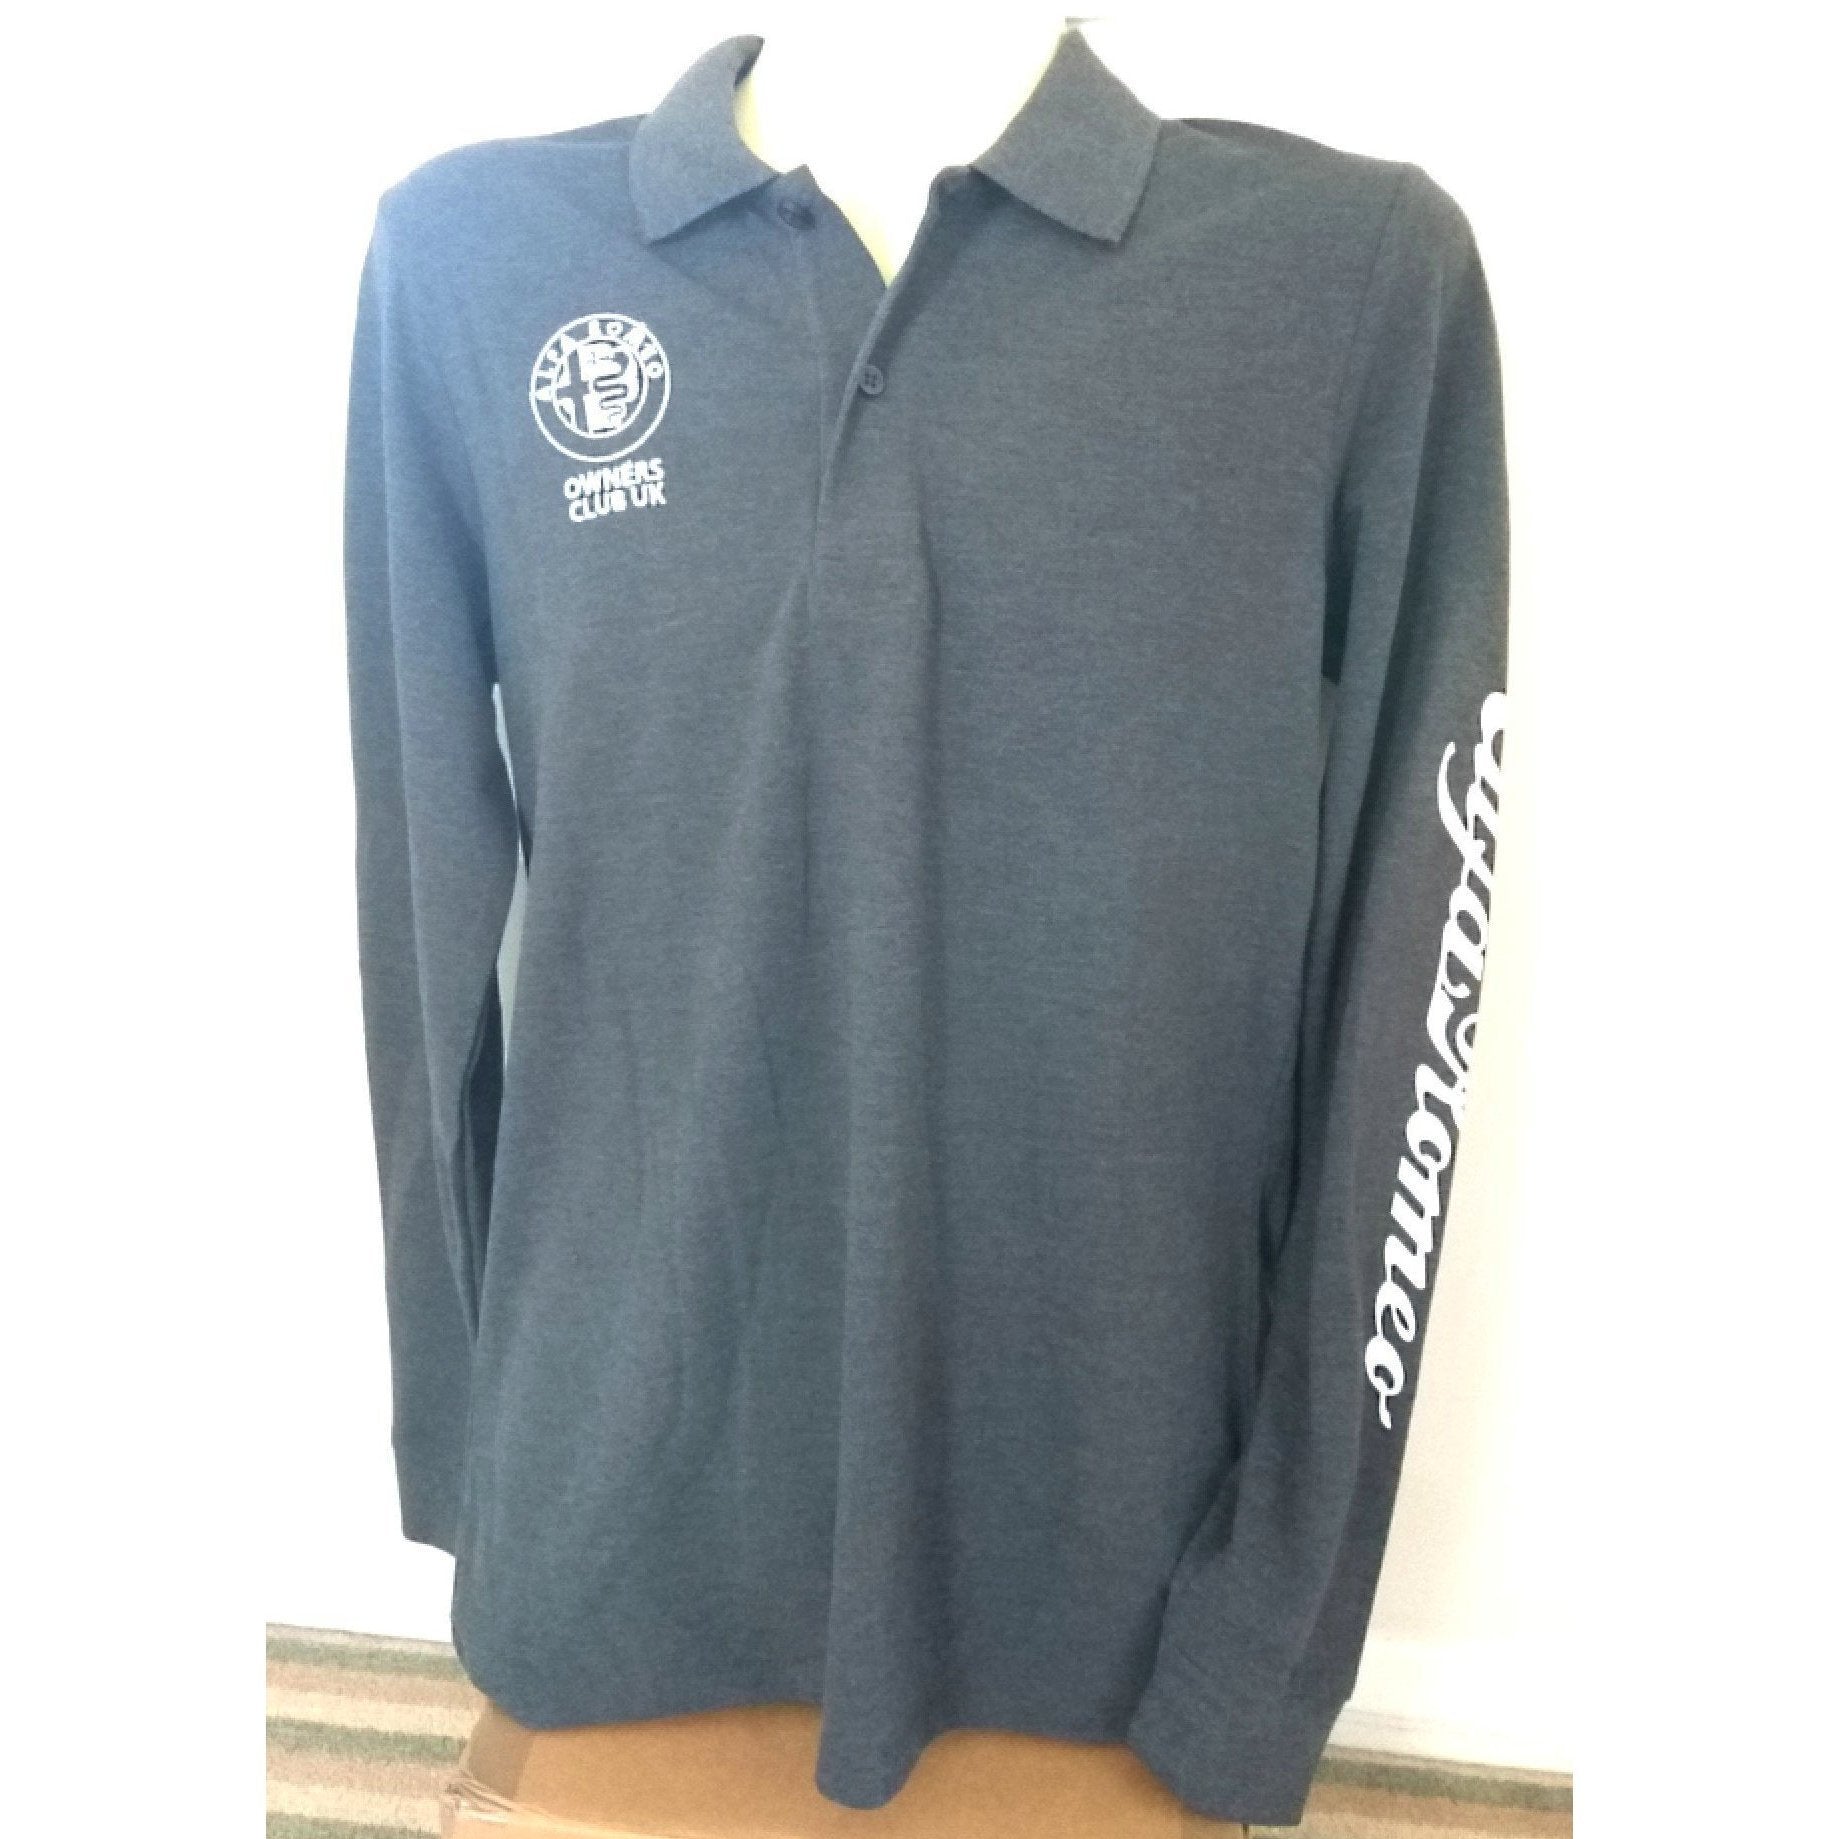 AROC Long Sleeve Polo in Grey - Small & Medium ONLY